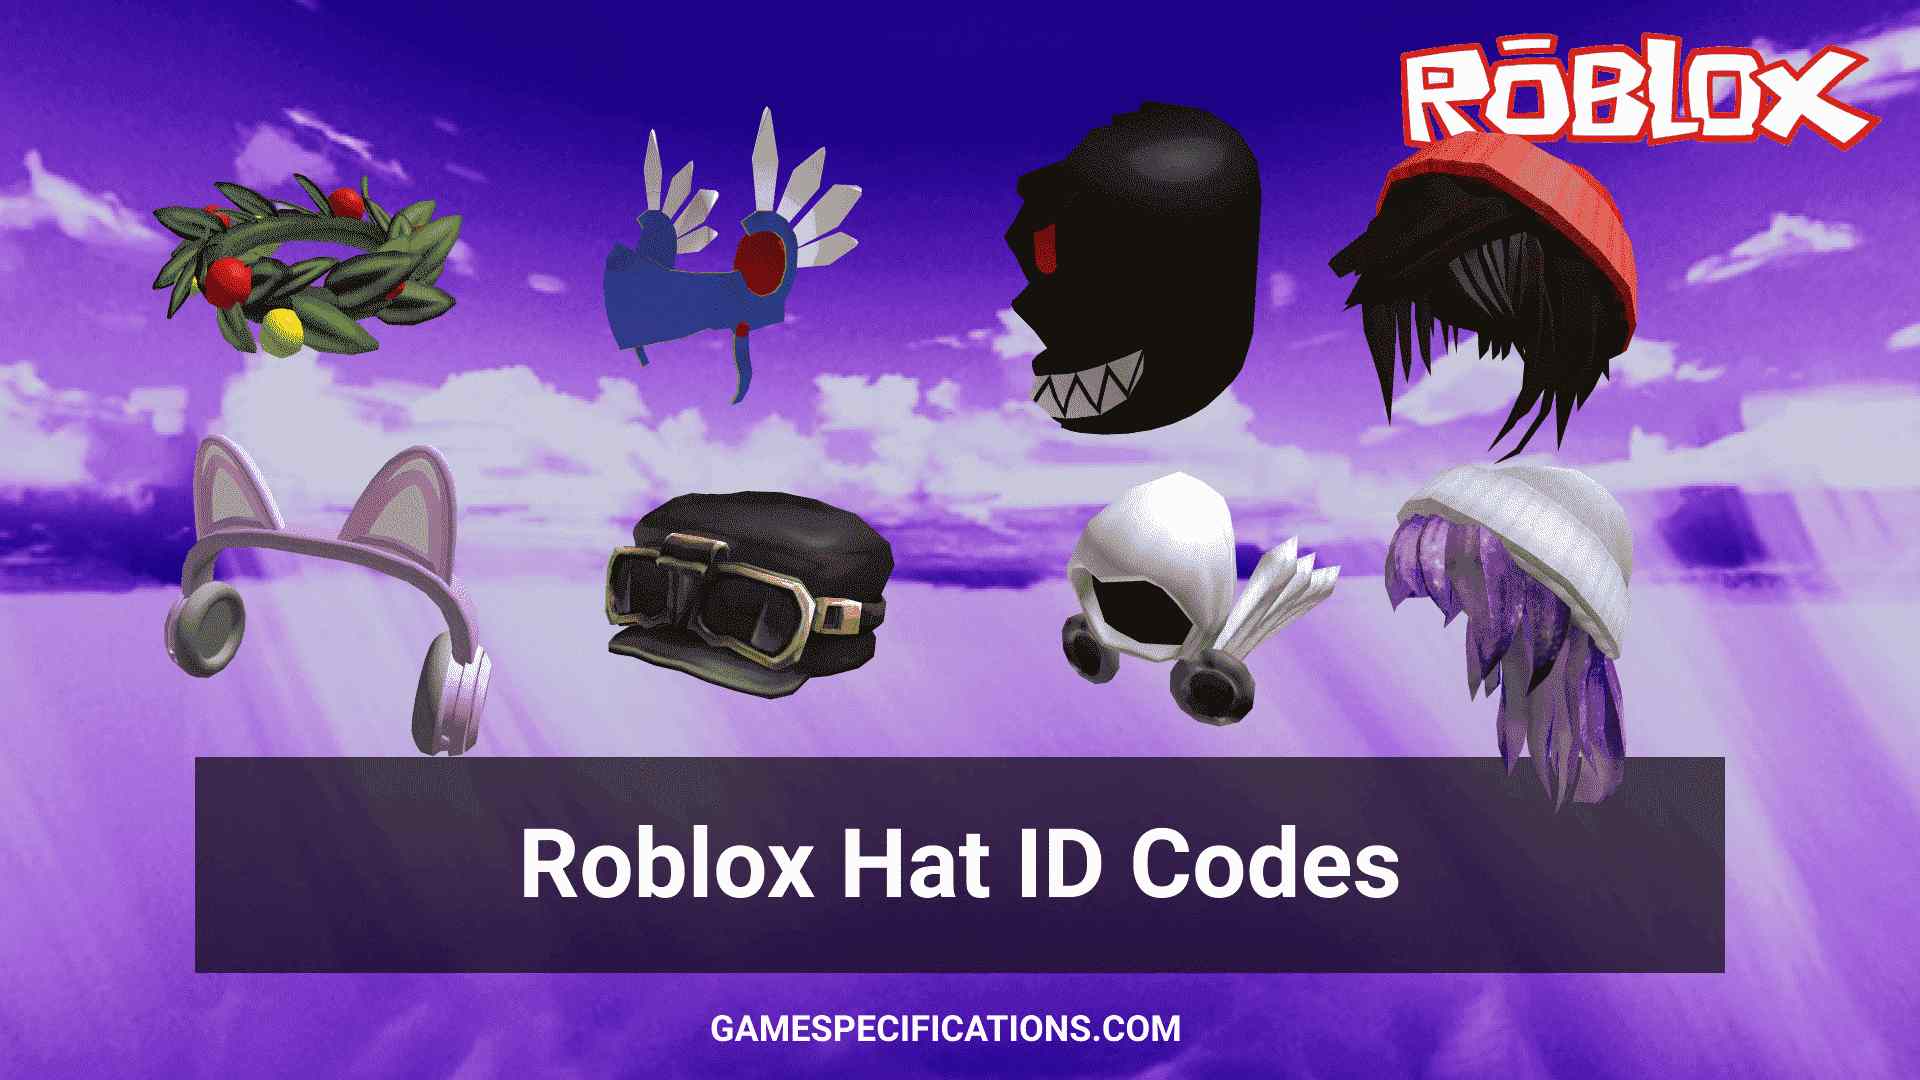 83 Roblox Hat IDs That'll Make You Look Incredible - Game Specifications